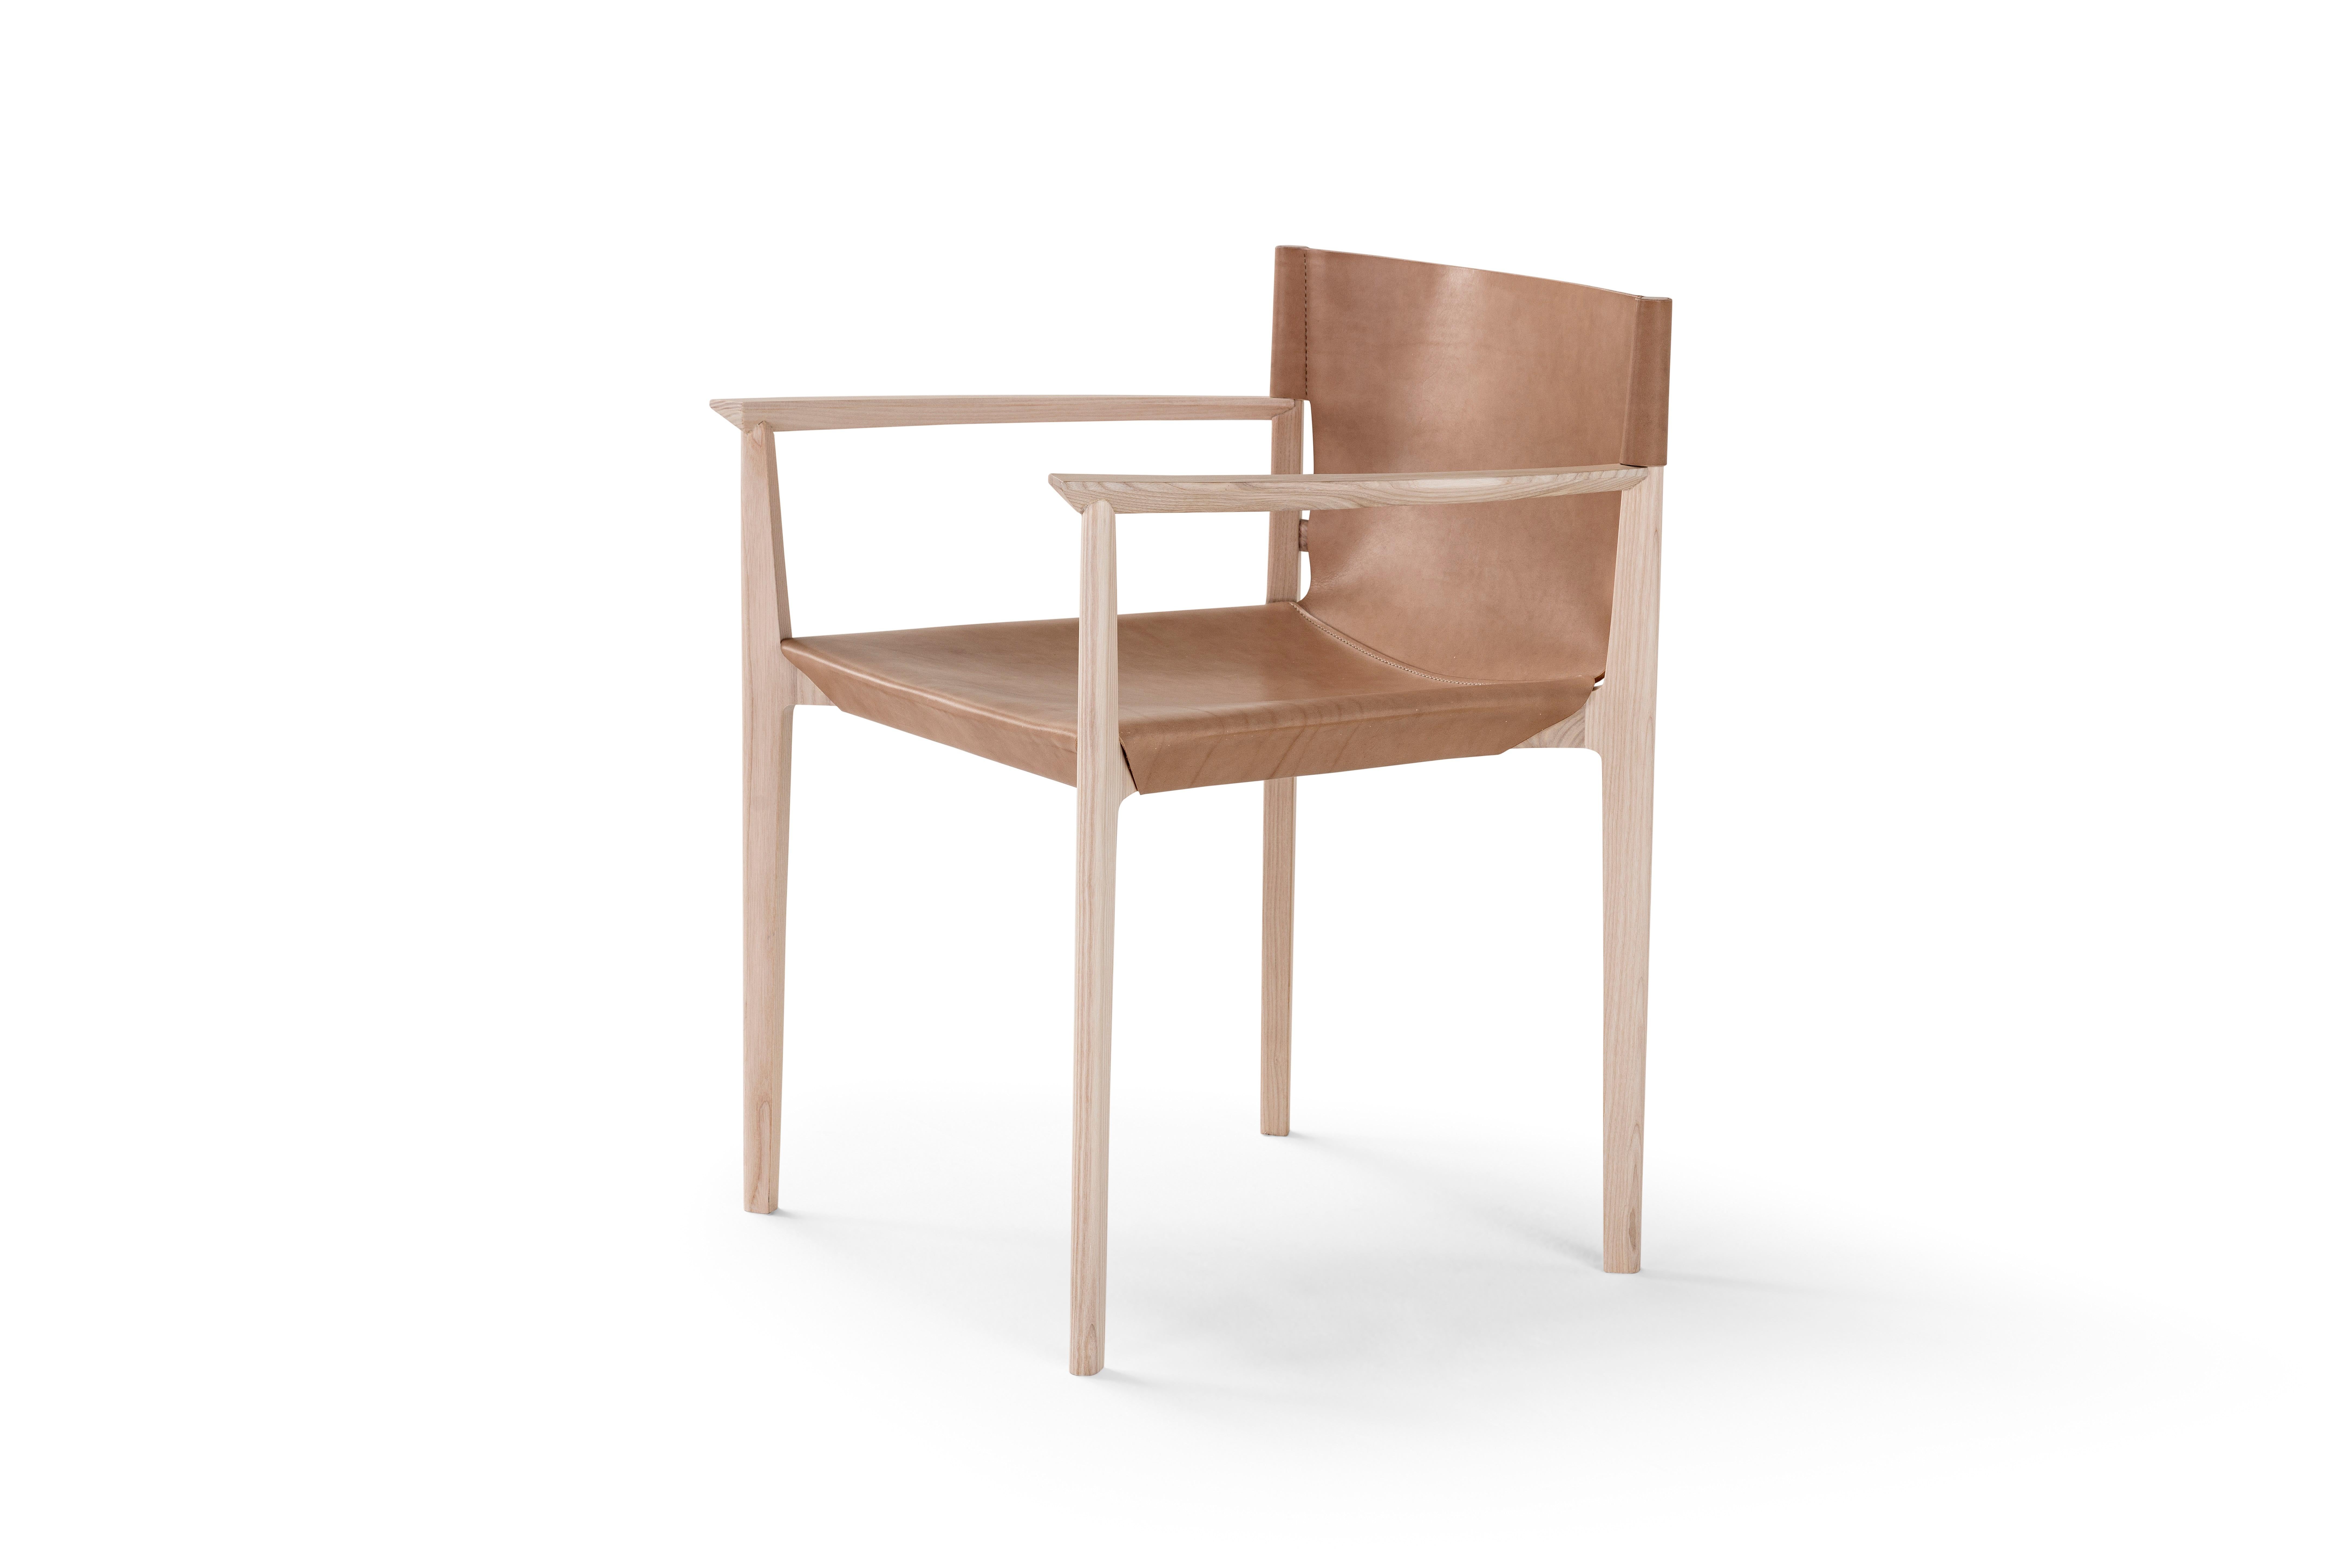 Wooden Chair 'Stilt', Cuoio & Wood
Designer Stefano Grassi

Height: 75 cm 
Width: 61,5 cm
Depth: 60 cm 

STILT is the chair from essential design and balanced shapes that recall serenity and home warmth. Its solid wood structure reminds the ancient